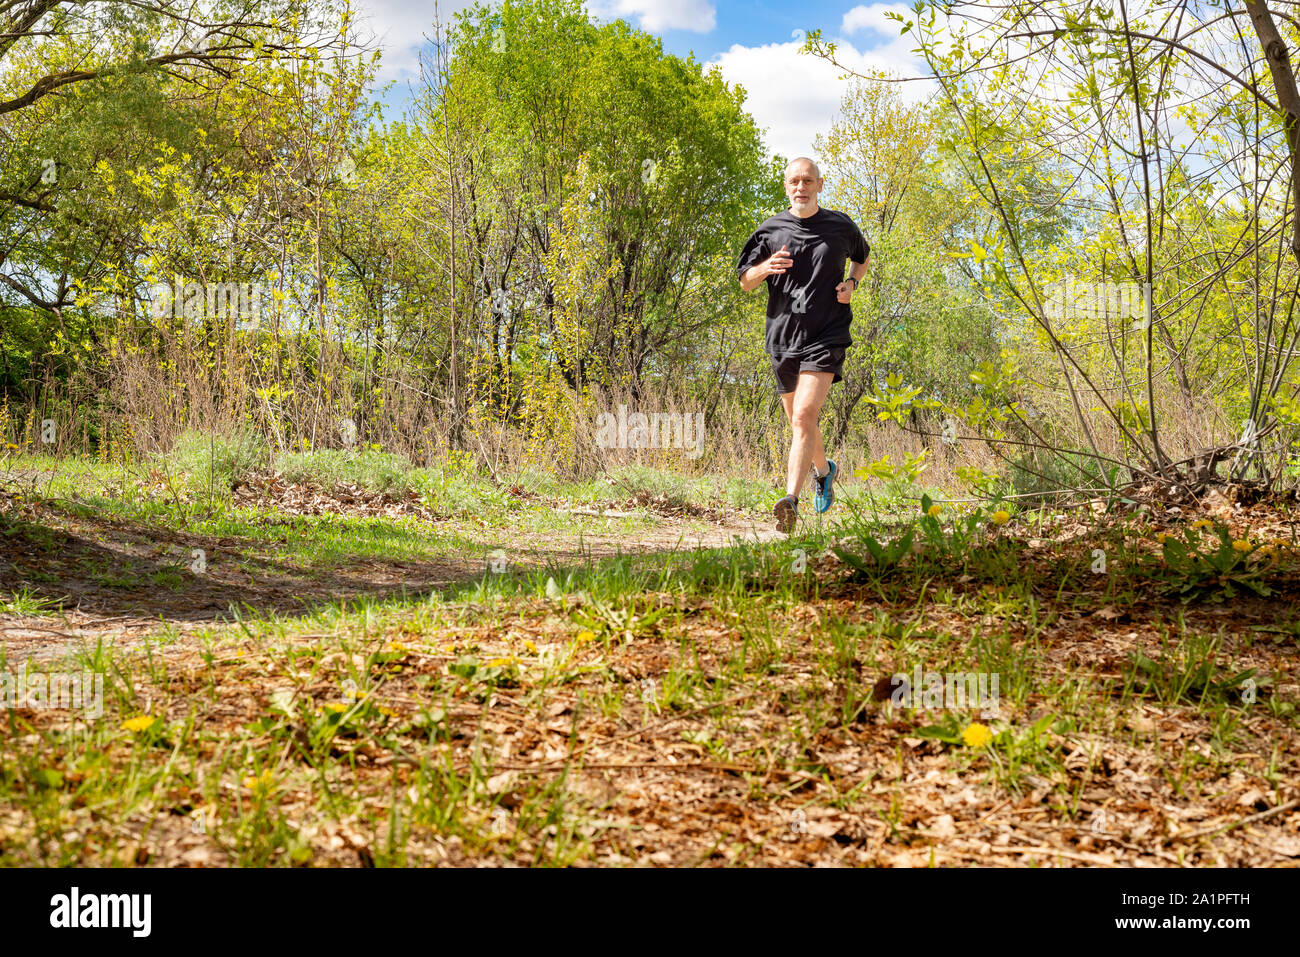 A senior man dressed in black  is running in the forest, during a warm autumn day Stock Photo